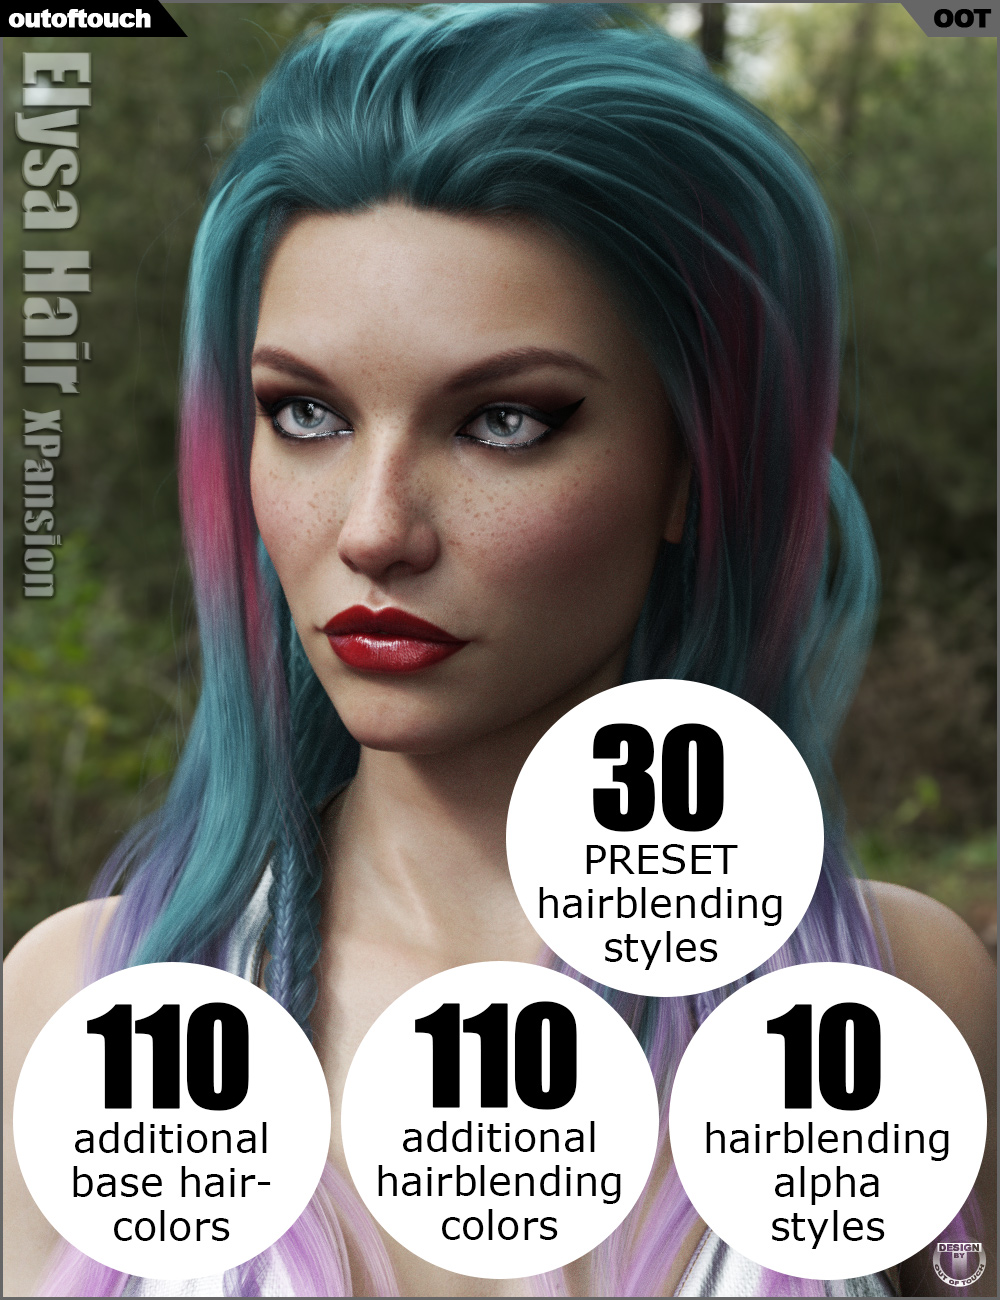 OOT Hairblending 2.0 Texture XPansion for Elysa Hair by: outoftouch, 3D Models by Daz 3D